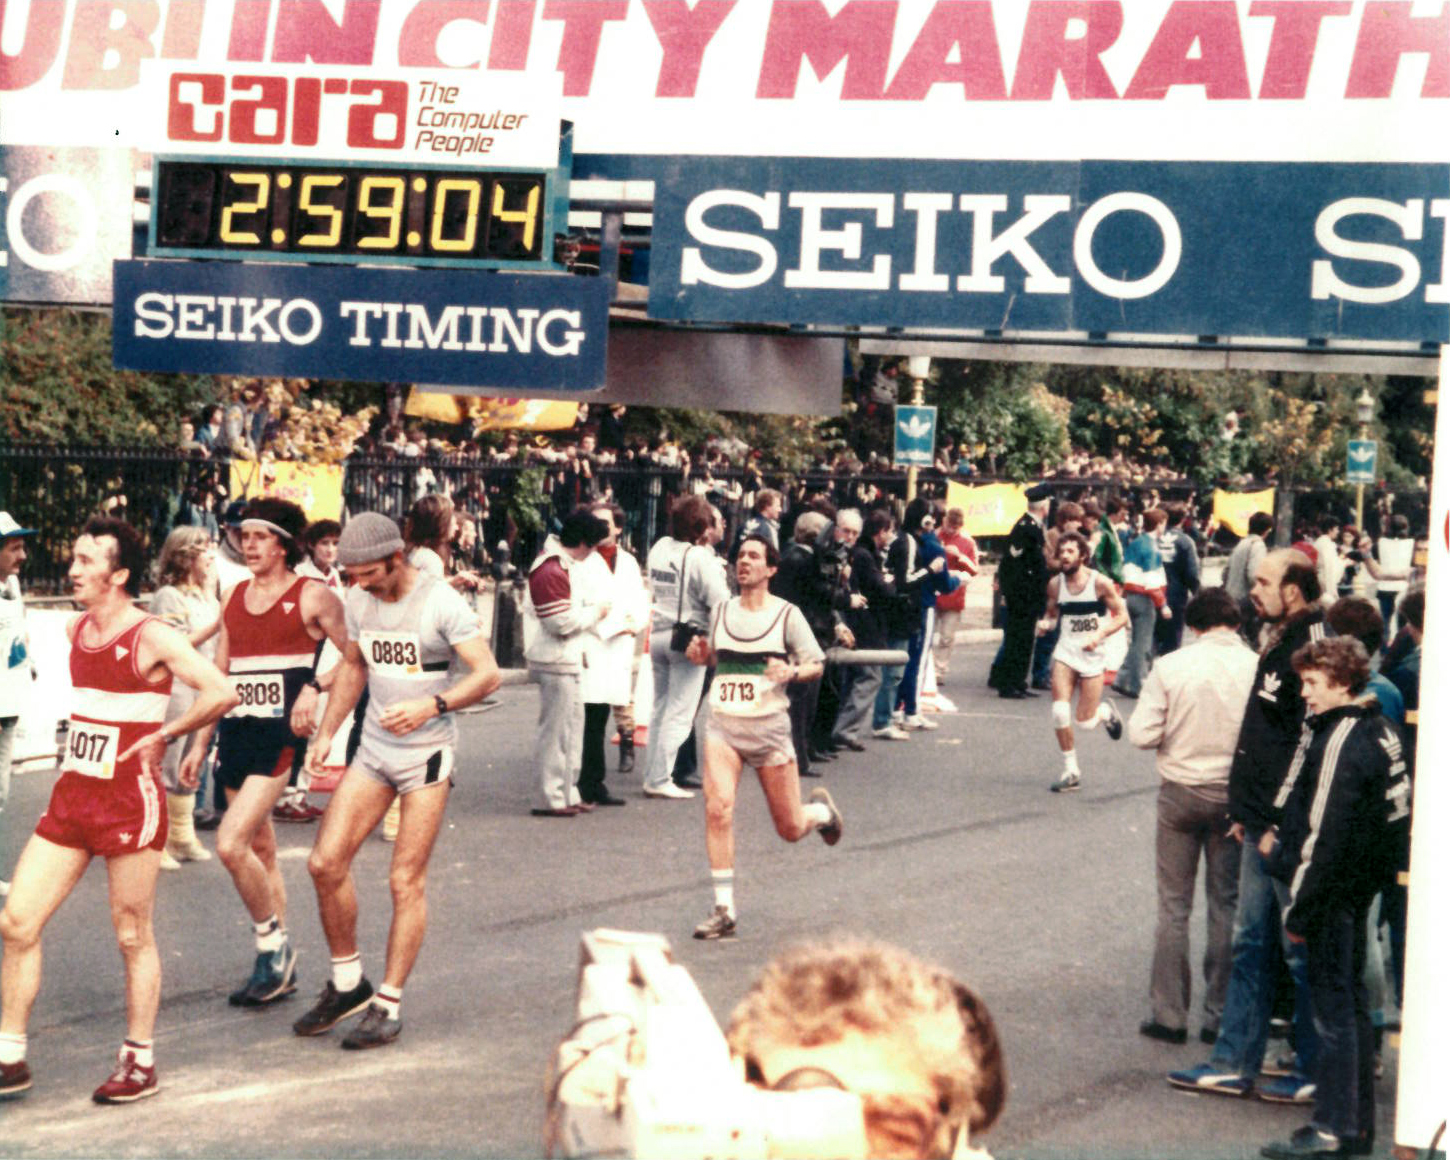 Clerkin (center, #3713) at the finish line of the 1983 Dublin Marathon. He finished with a sub-three-hour time after four friendly bets. 